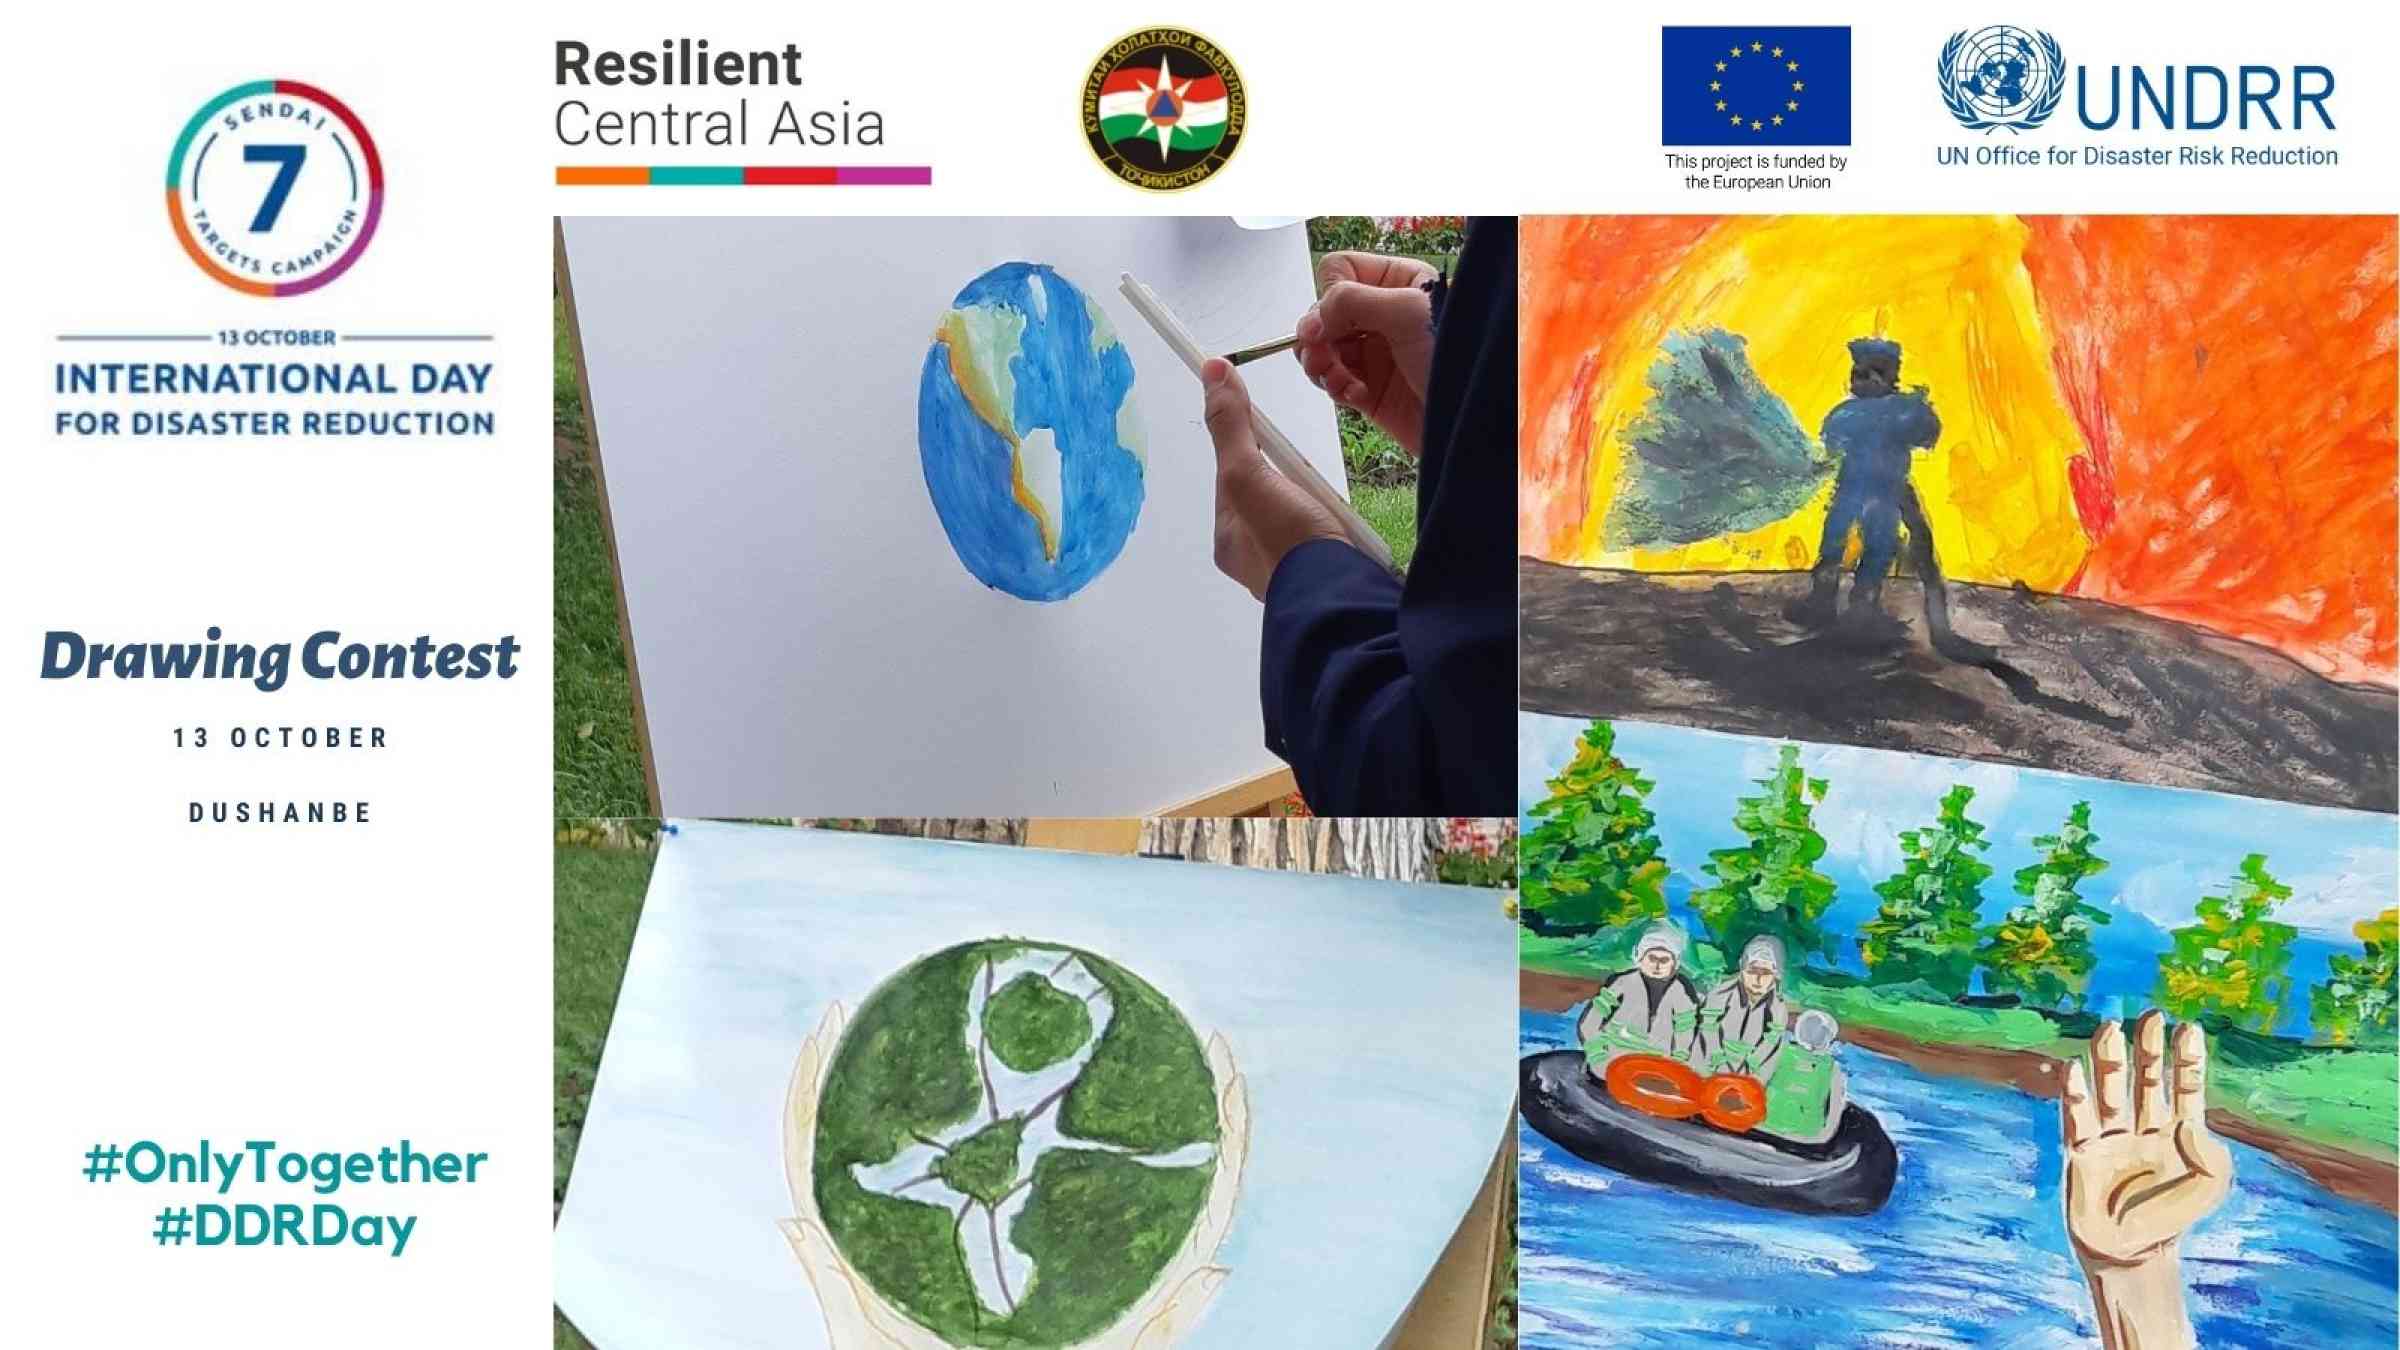 Drawing contest in Dushanbe dedicated to 2021 IDDRR